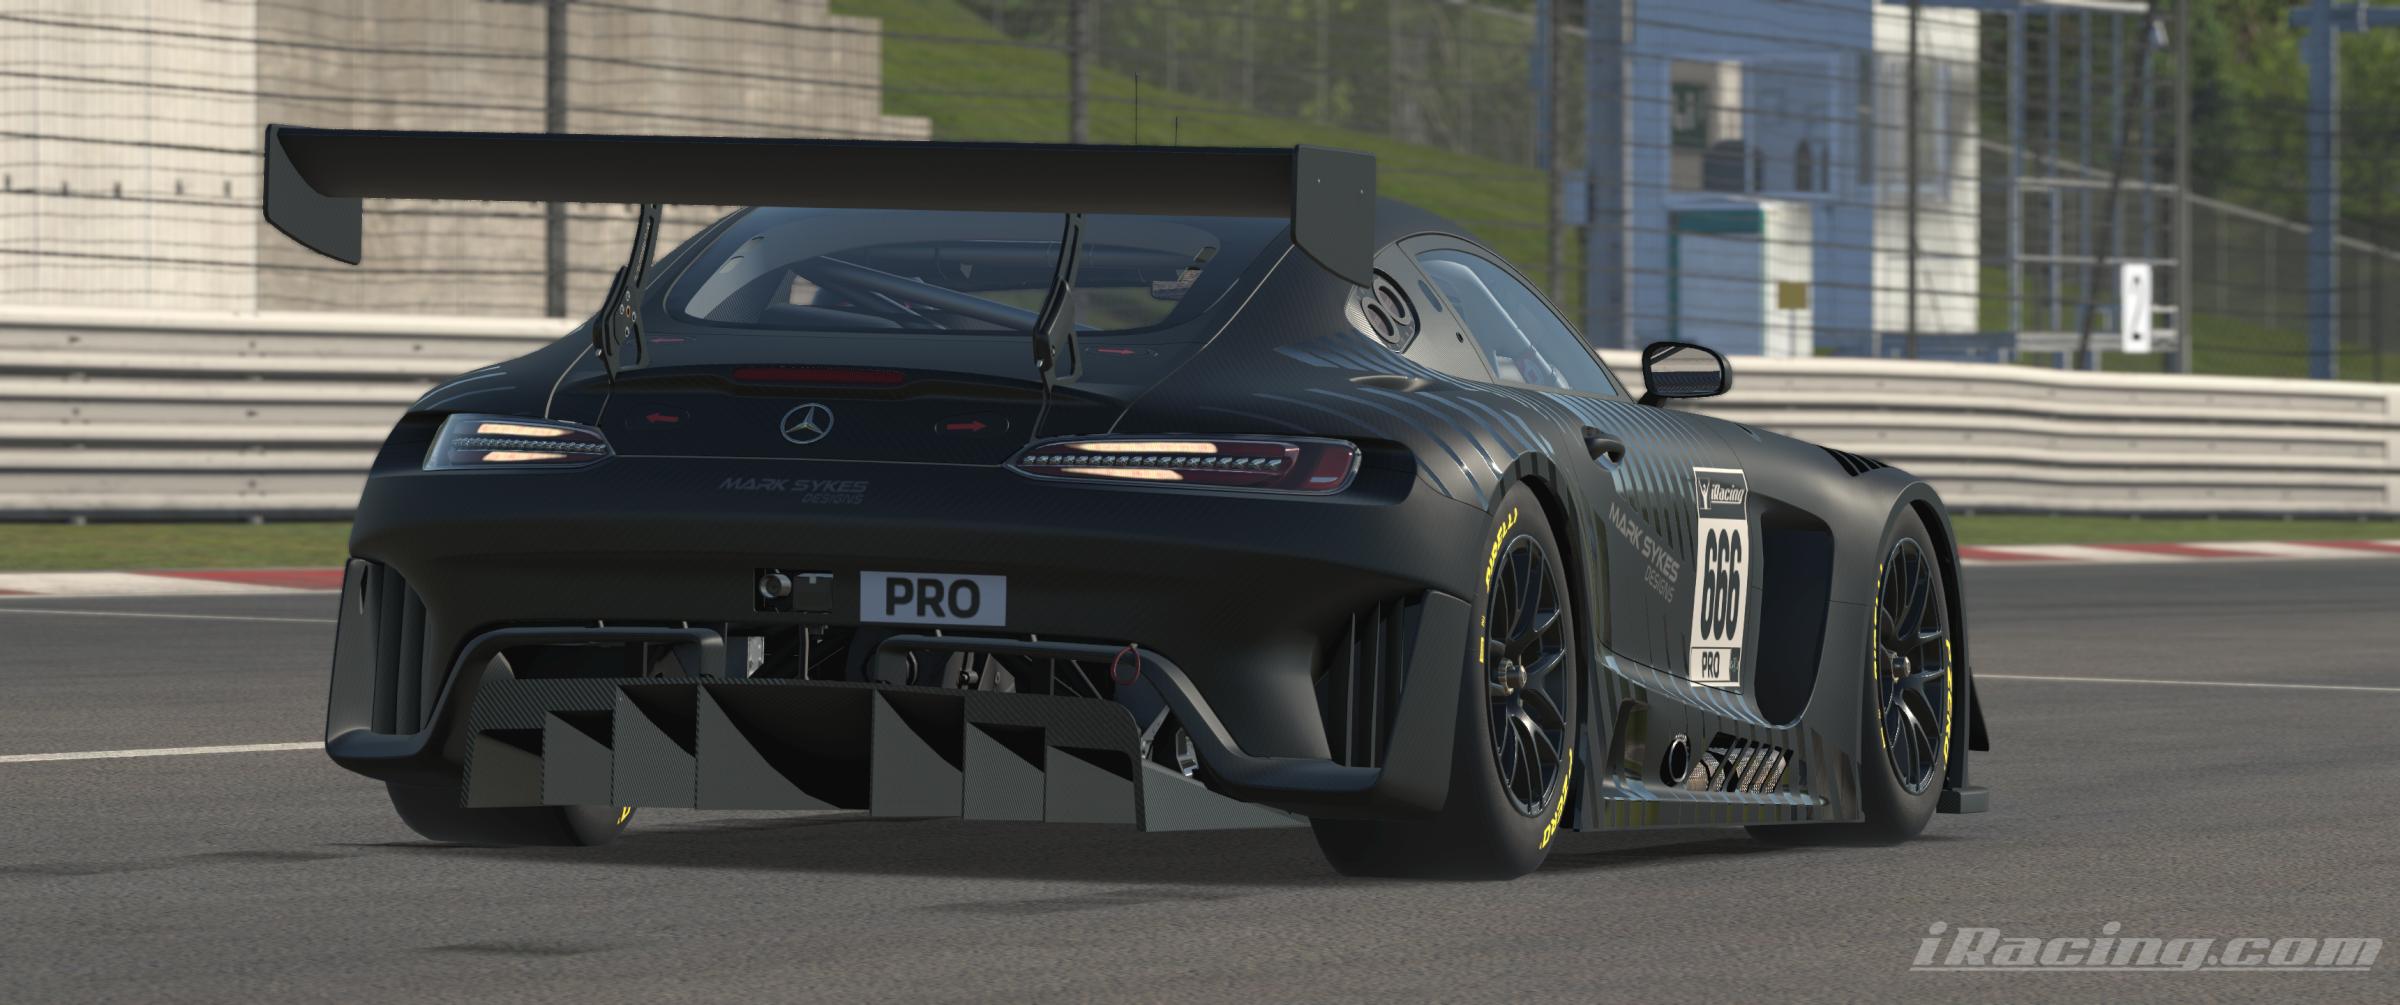 Preview of MS Designs CARBON Mercedes AMG GT3 2020 by Mark Sykes